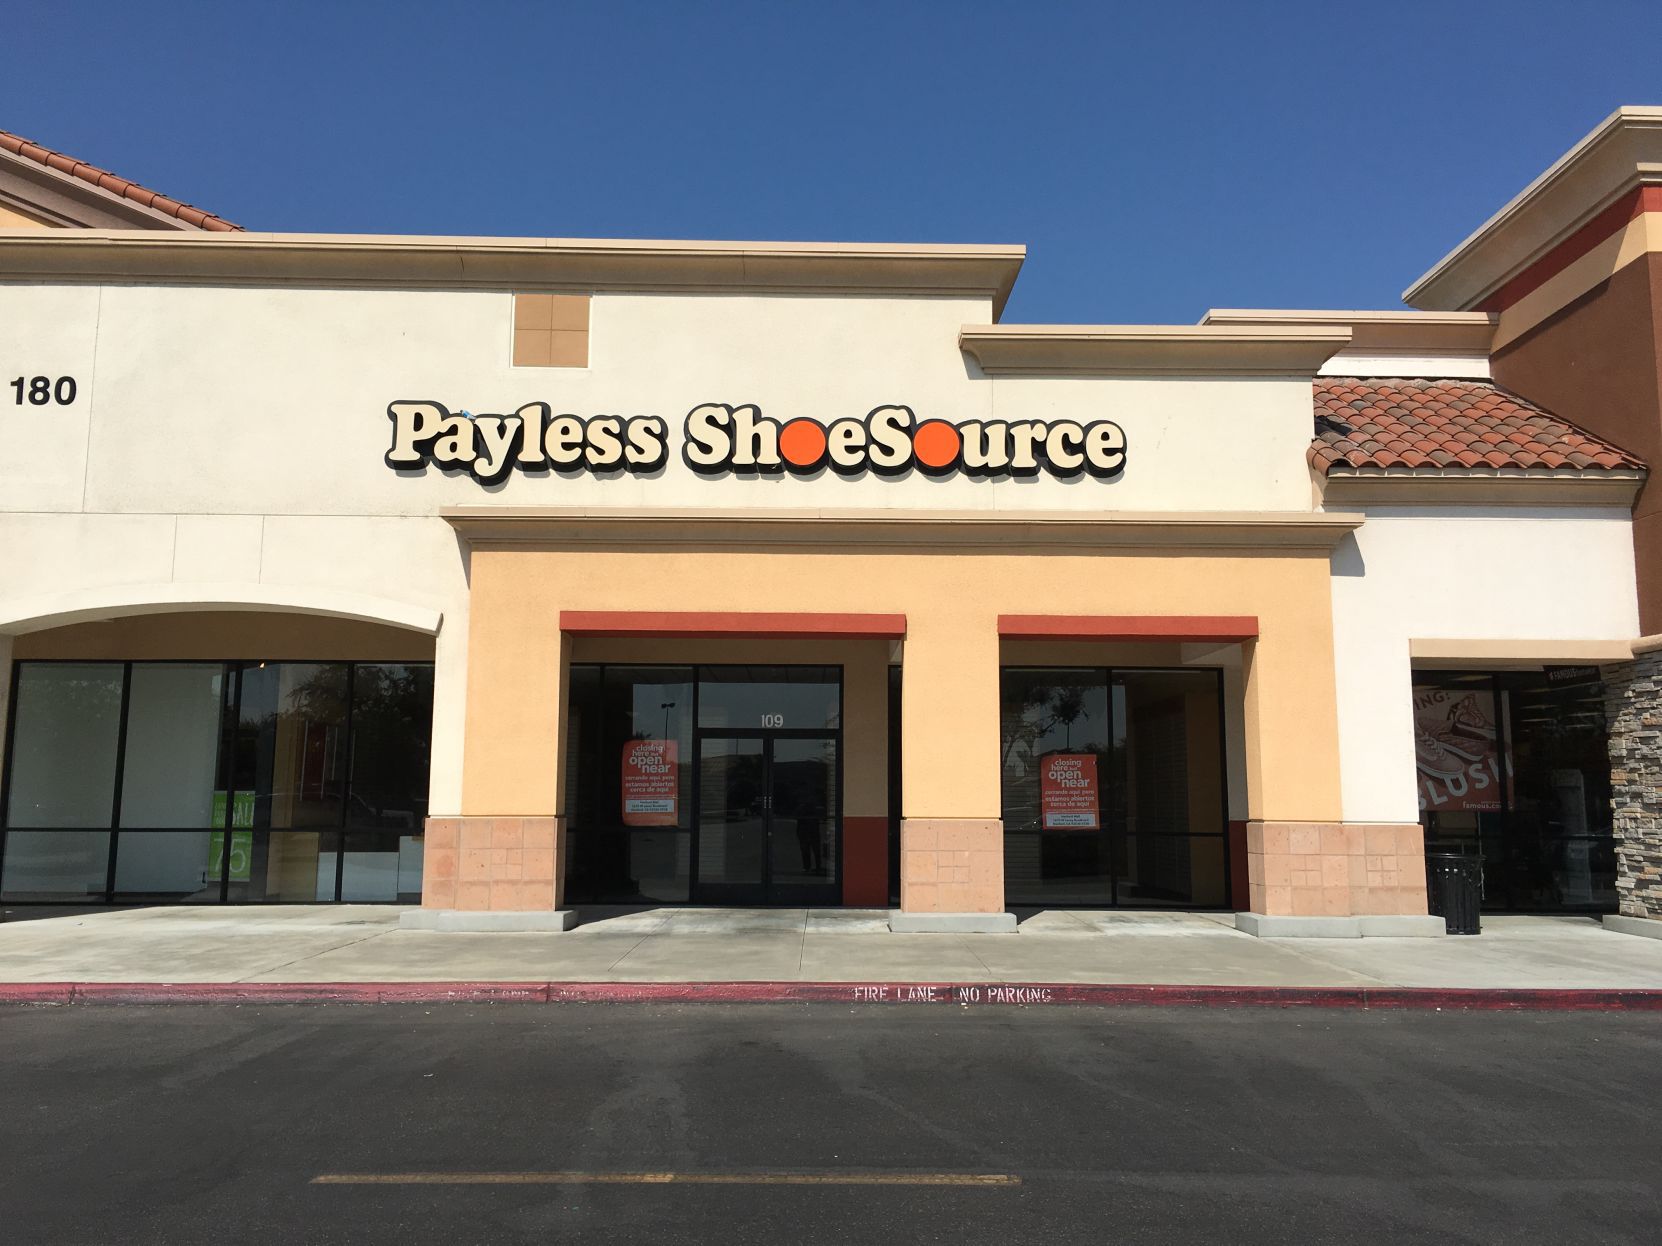 Payless Shoesource on 12th Ave. closes 